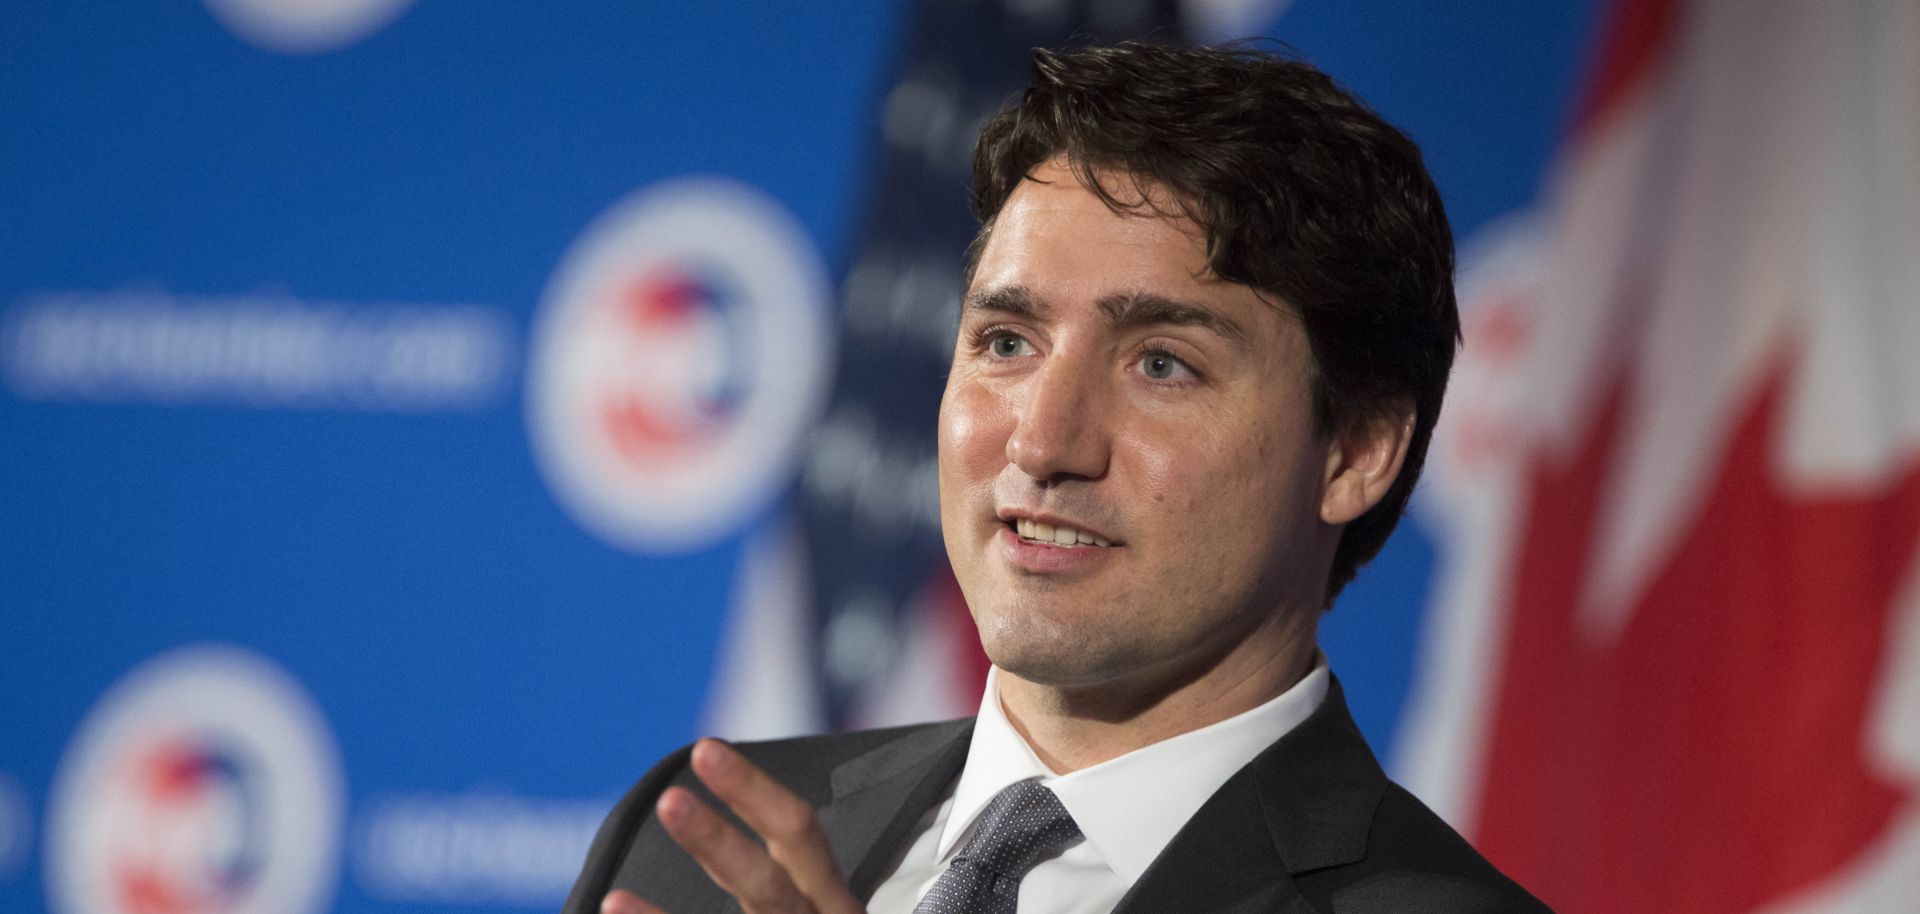 Canadian Prime Minister Justin Trudeau speaks at the U.S. Chamber of Commerce in Washington, D.C. 